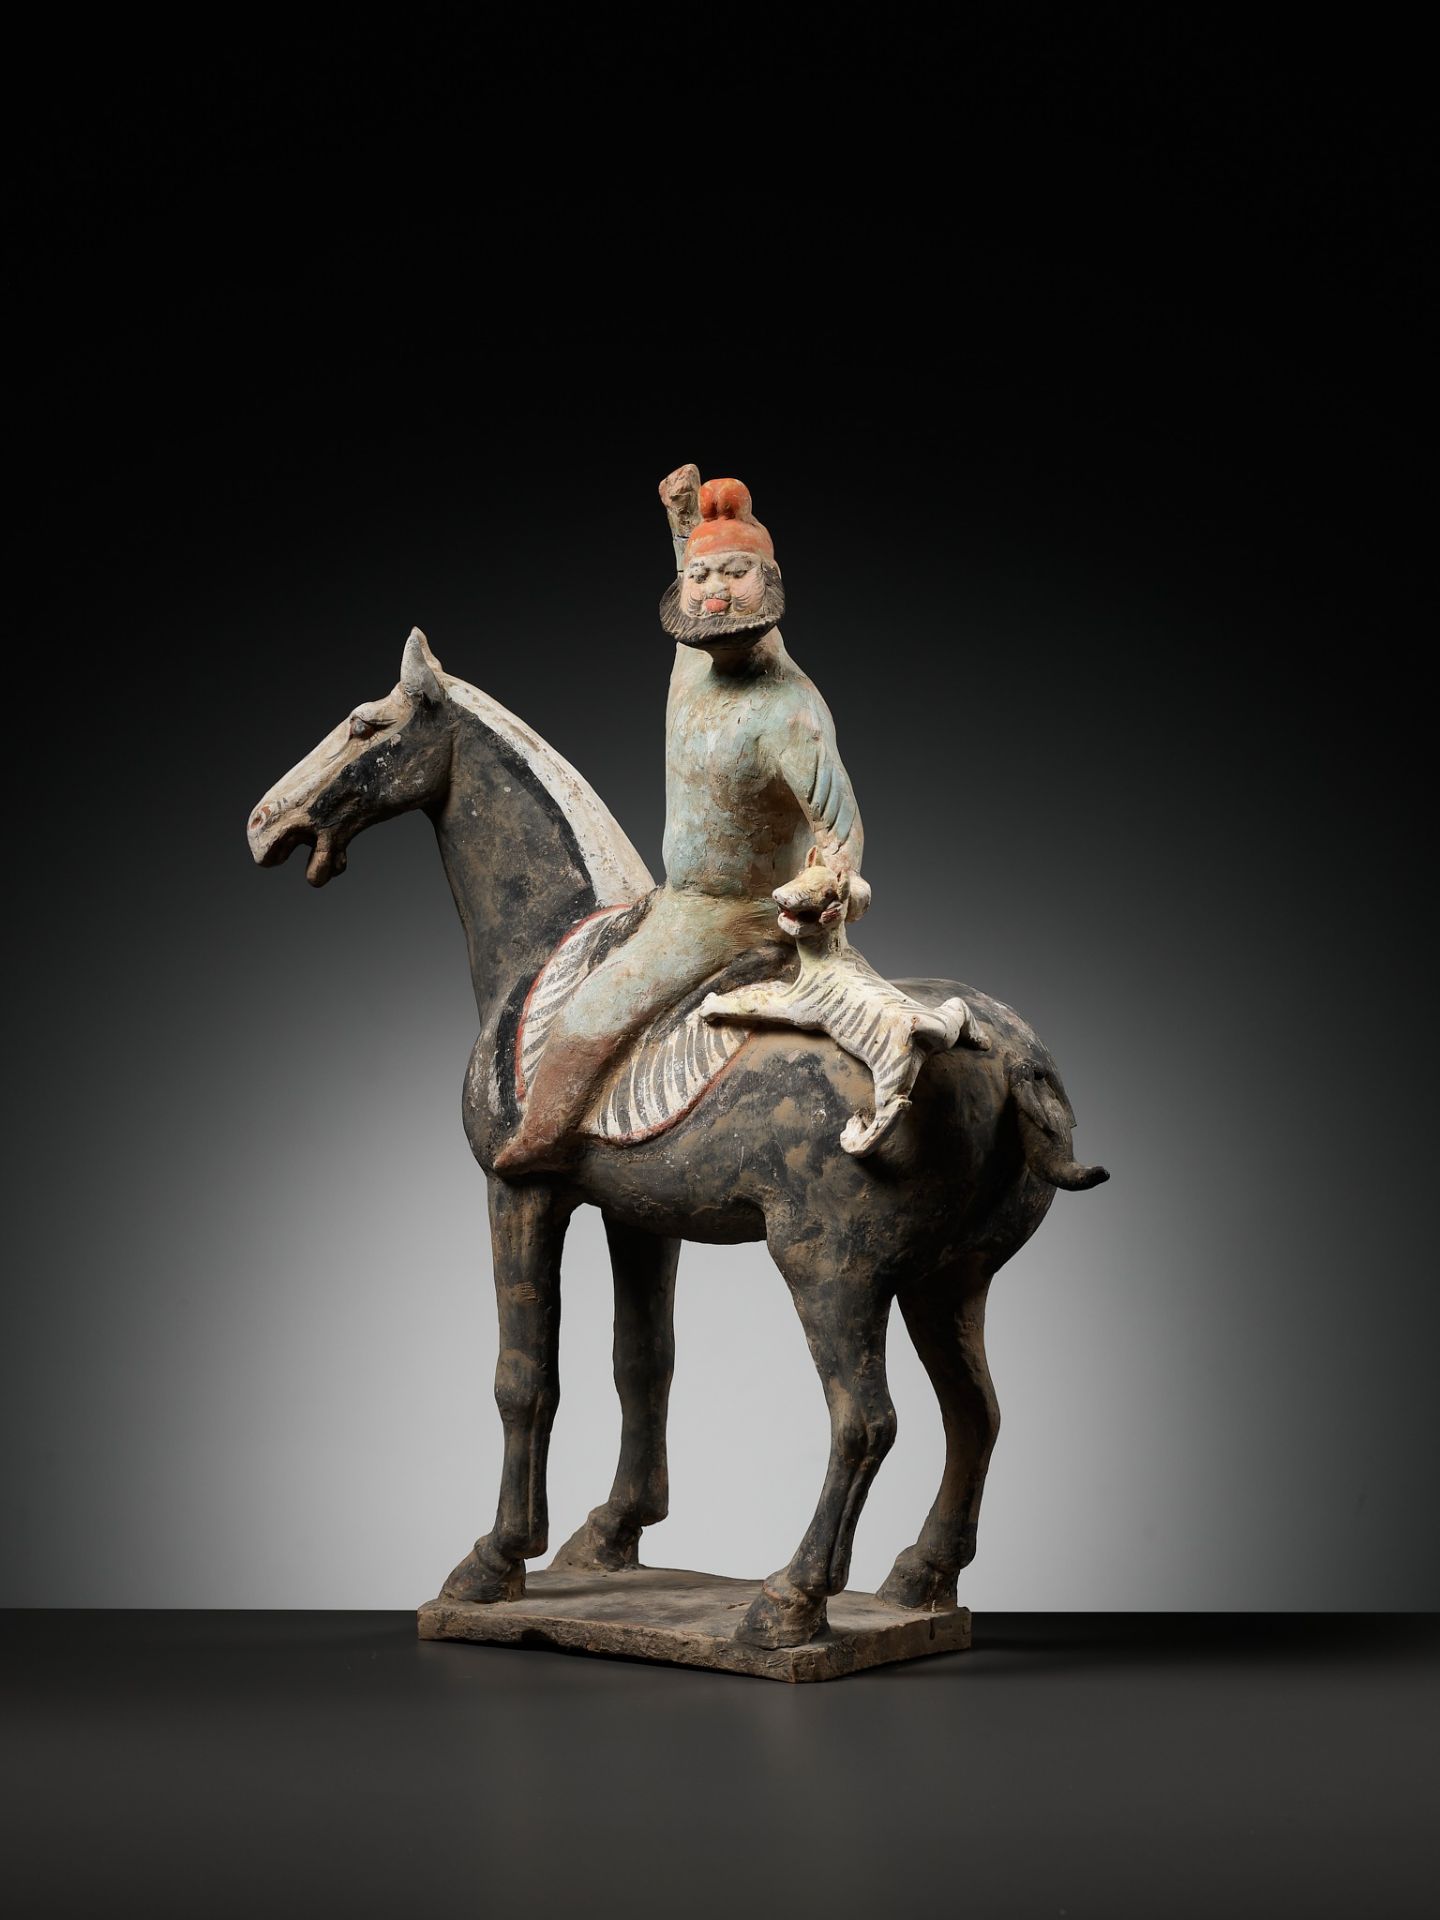 A RARE PAINTED POTTERY HORSE WITH A 'PHRYGIAN' RIDER AND TIGER CUB, TANG DYNASTY - Image 7 of 14